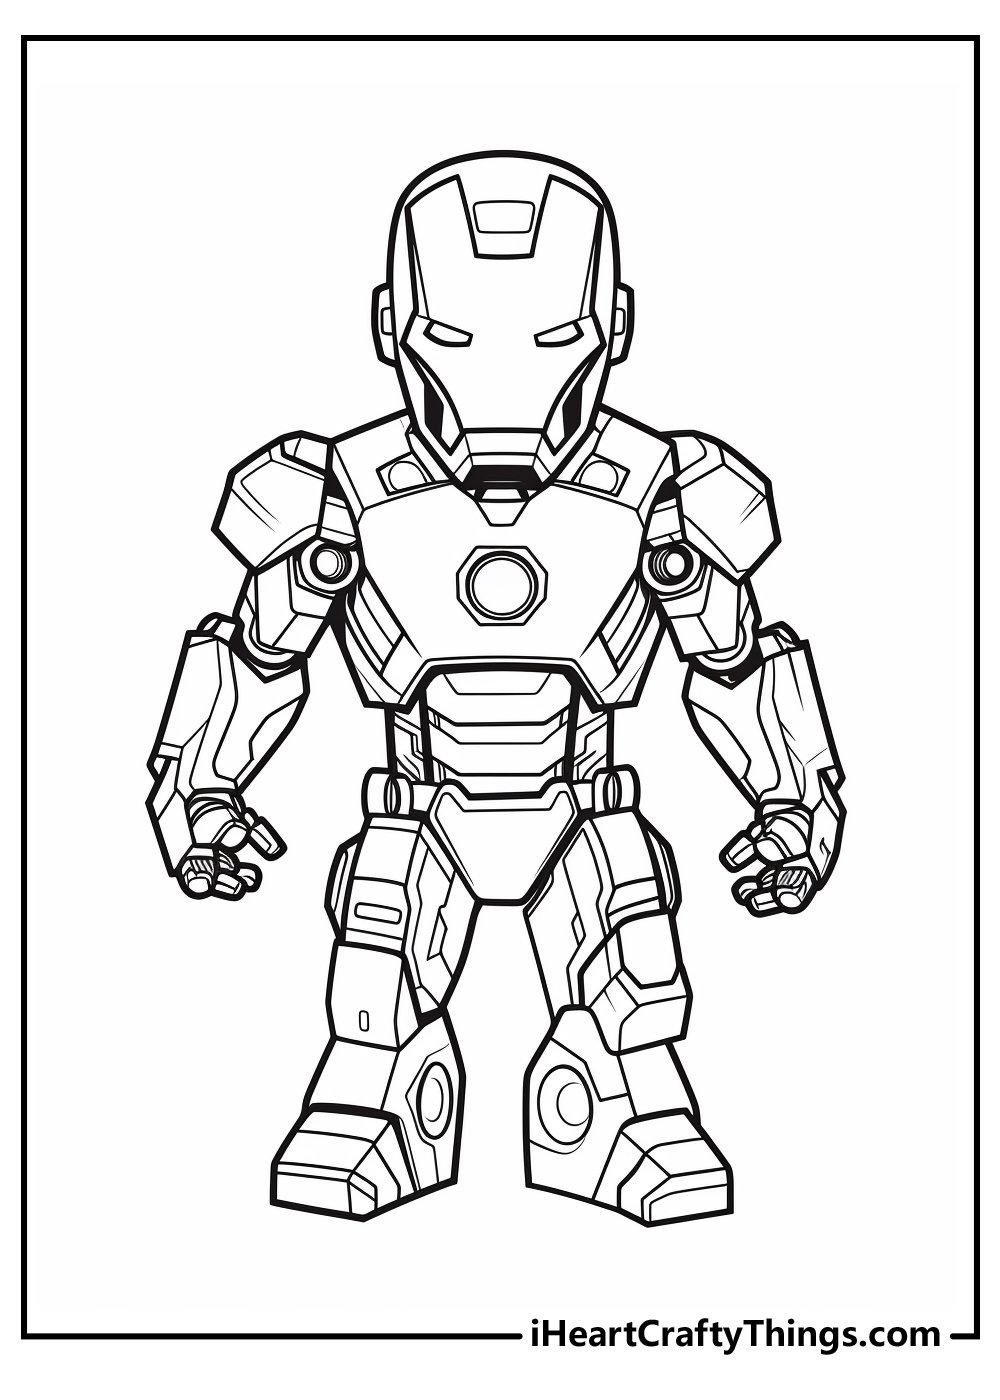 Iron man coloring pages free printables